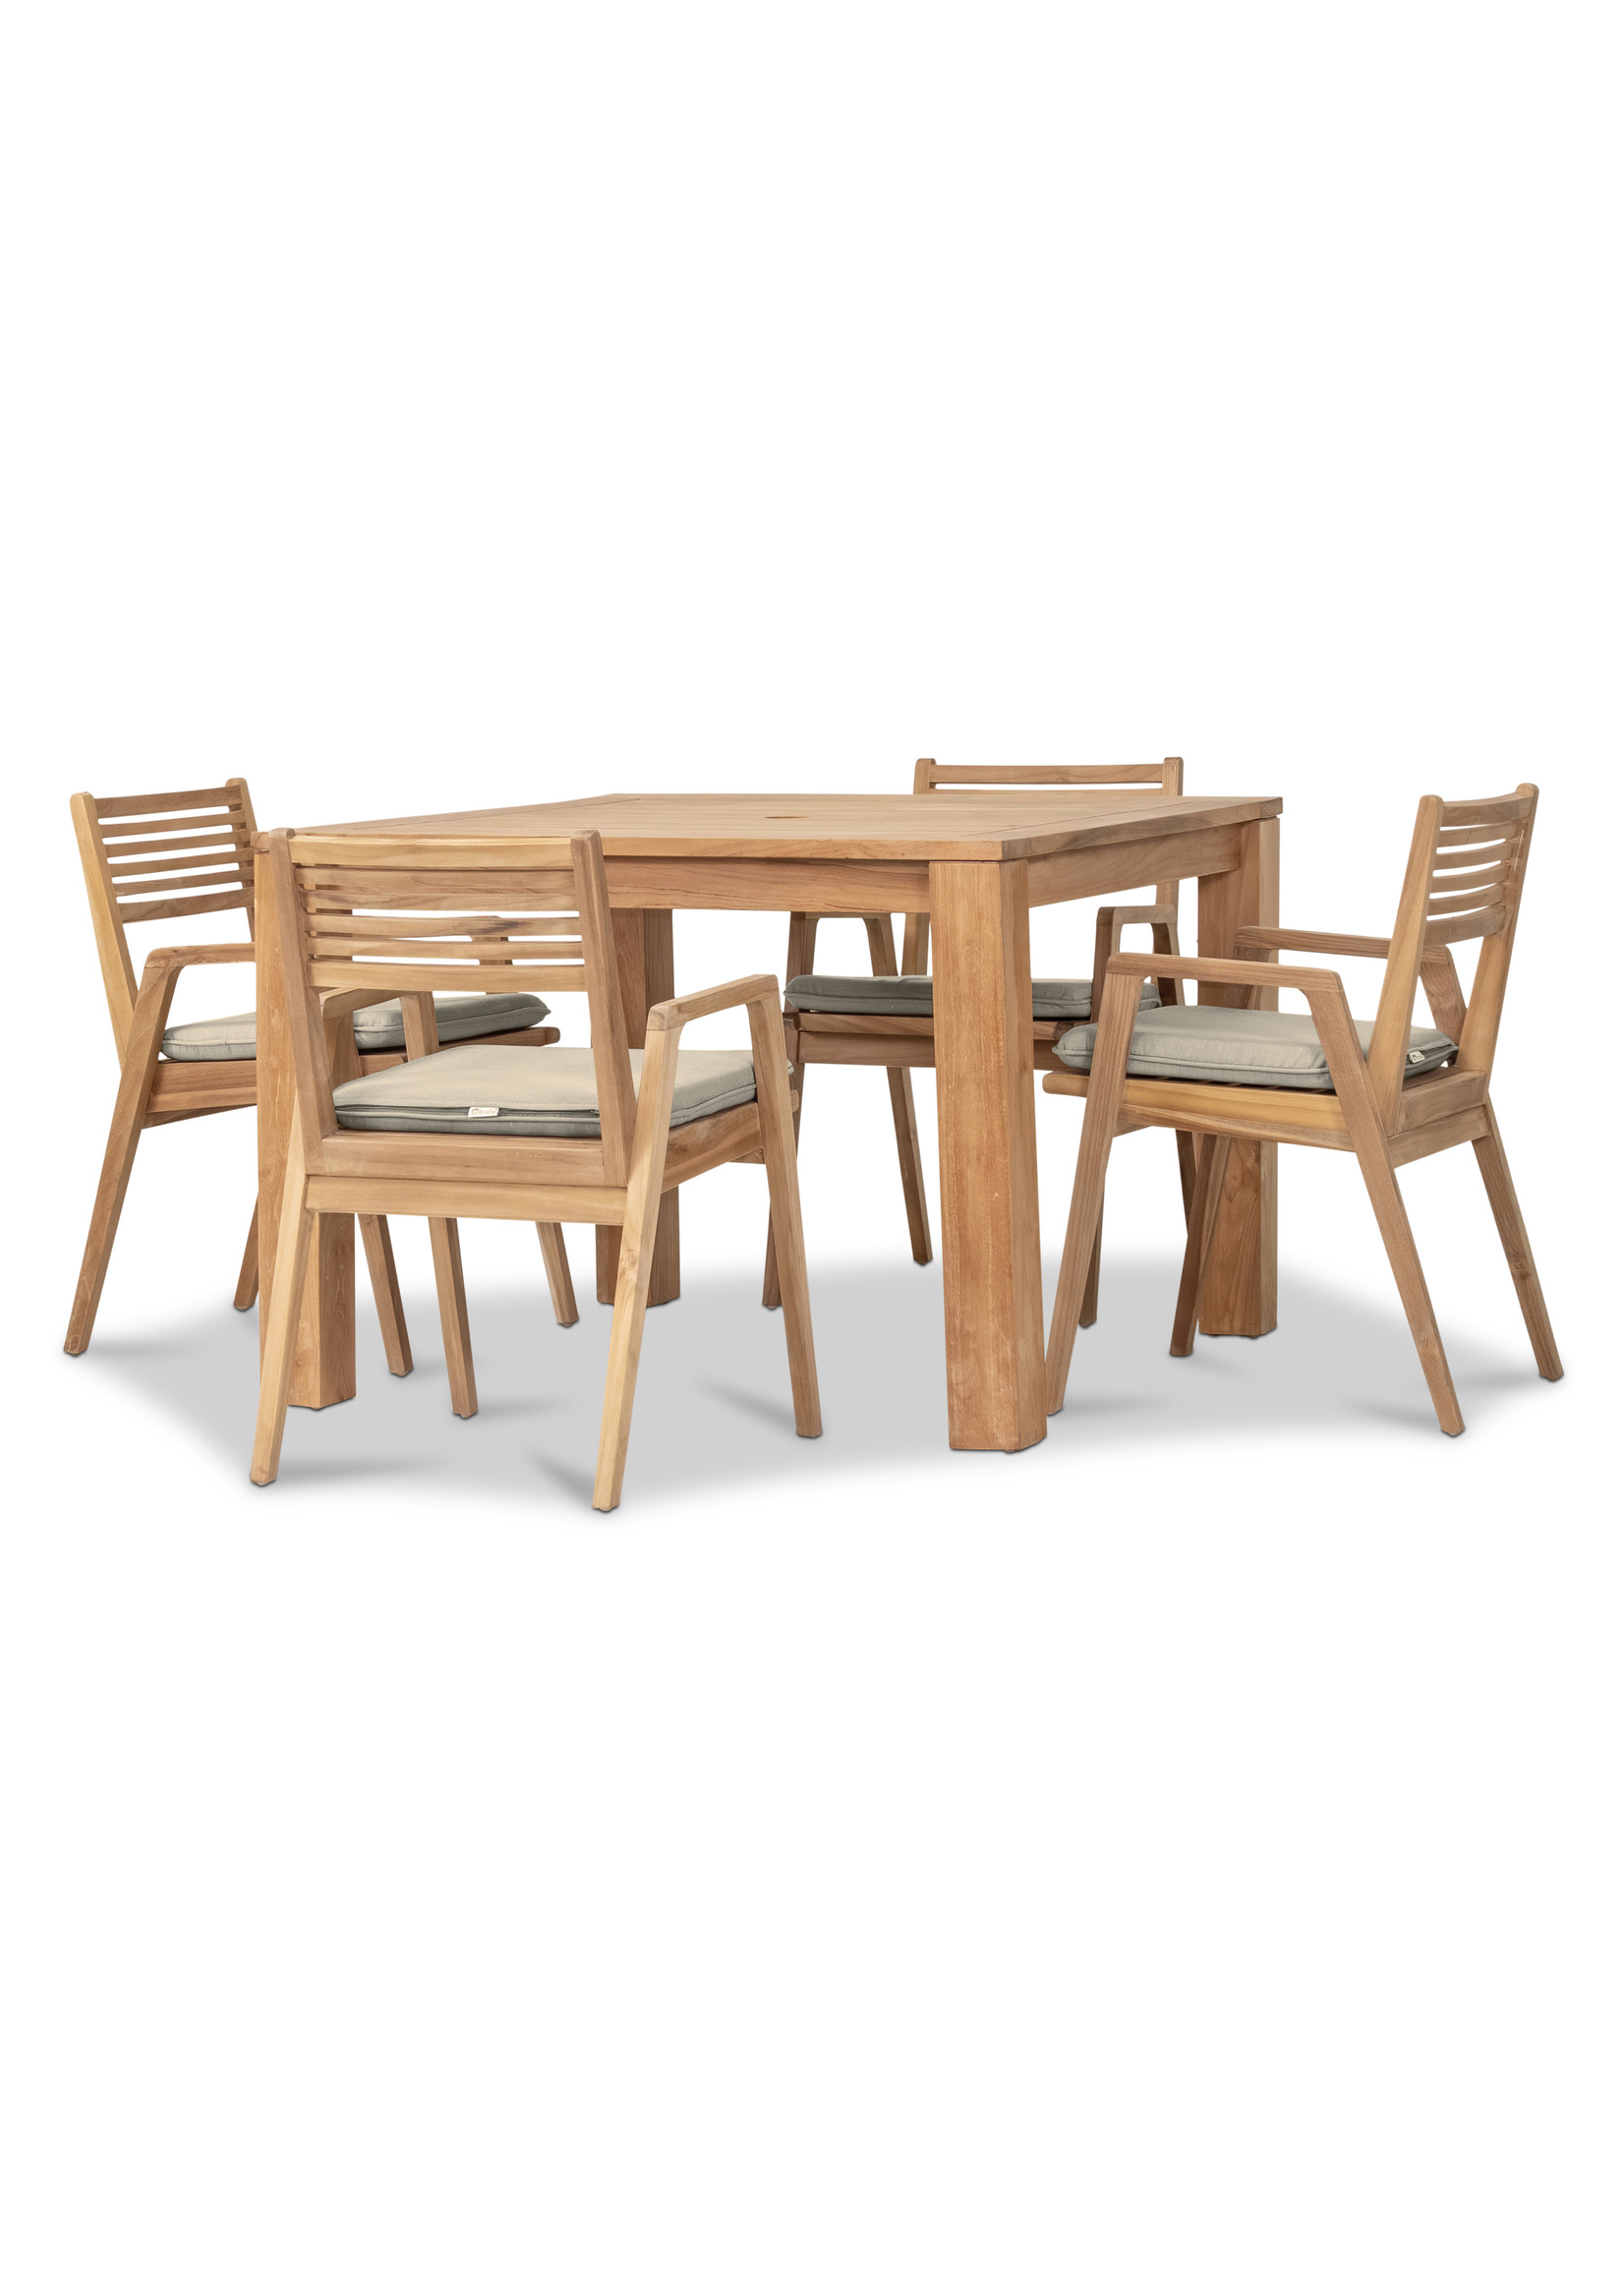 Harmonia Link 5 Piece Dining Set - (With Canvas Flax Cushions)